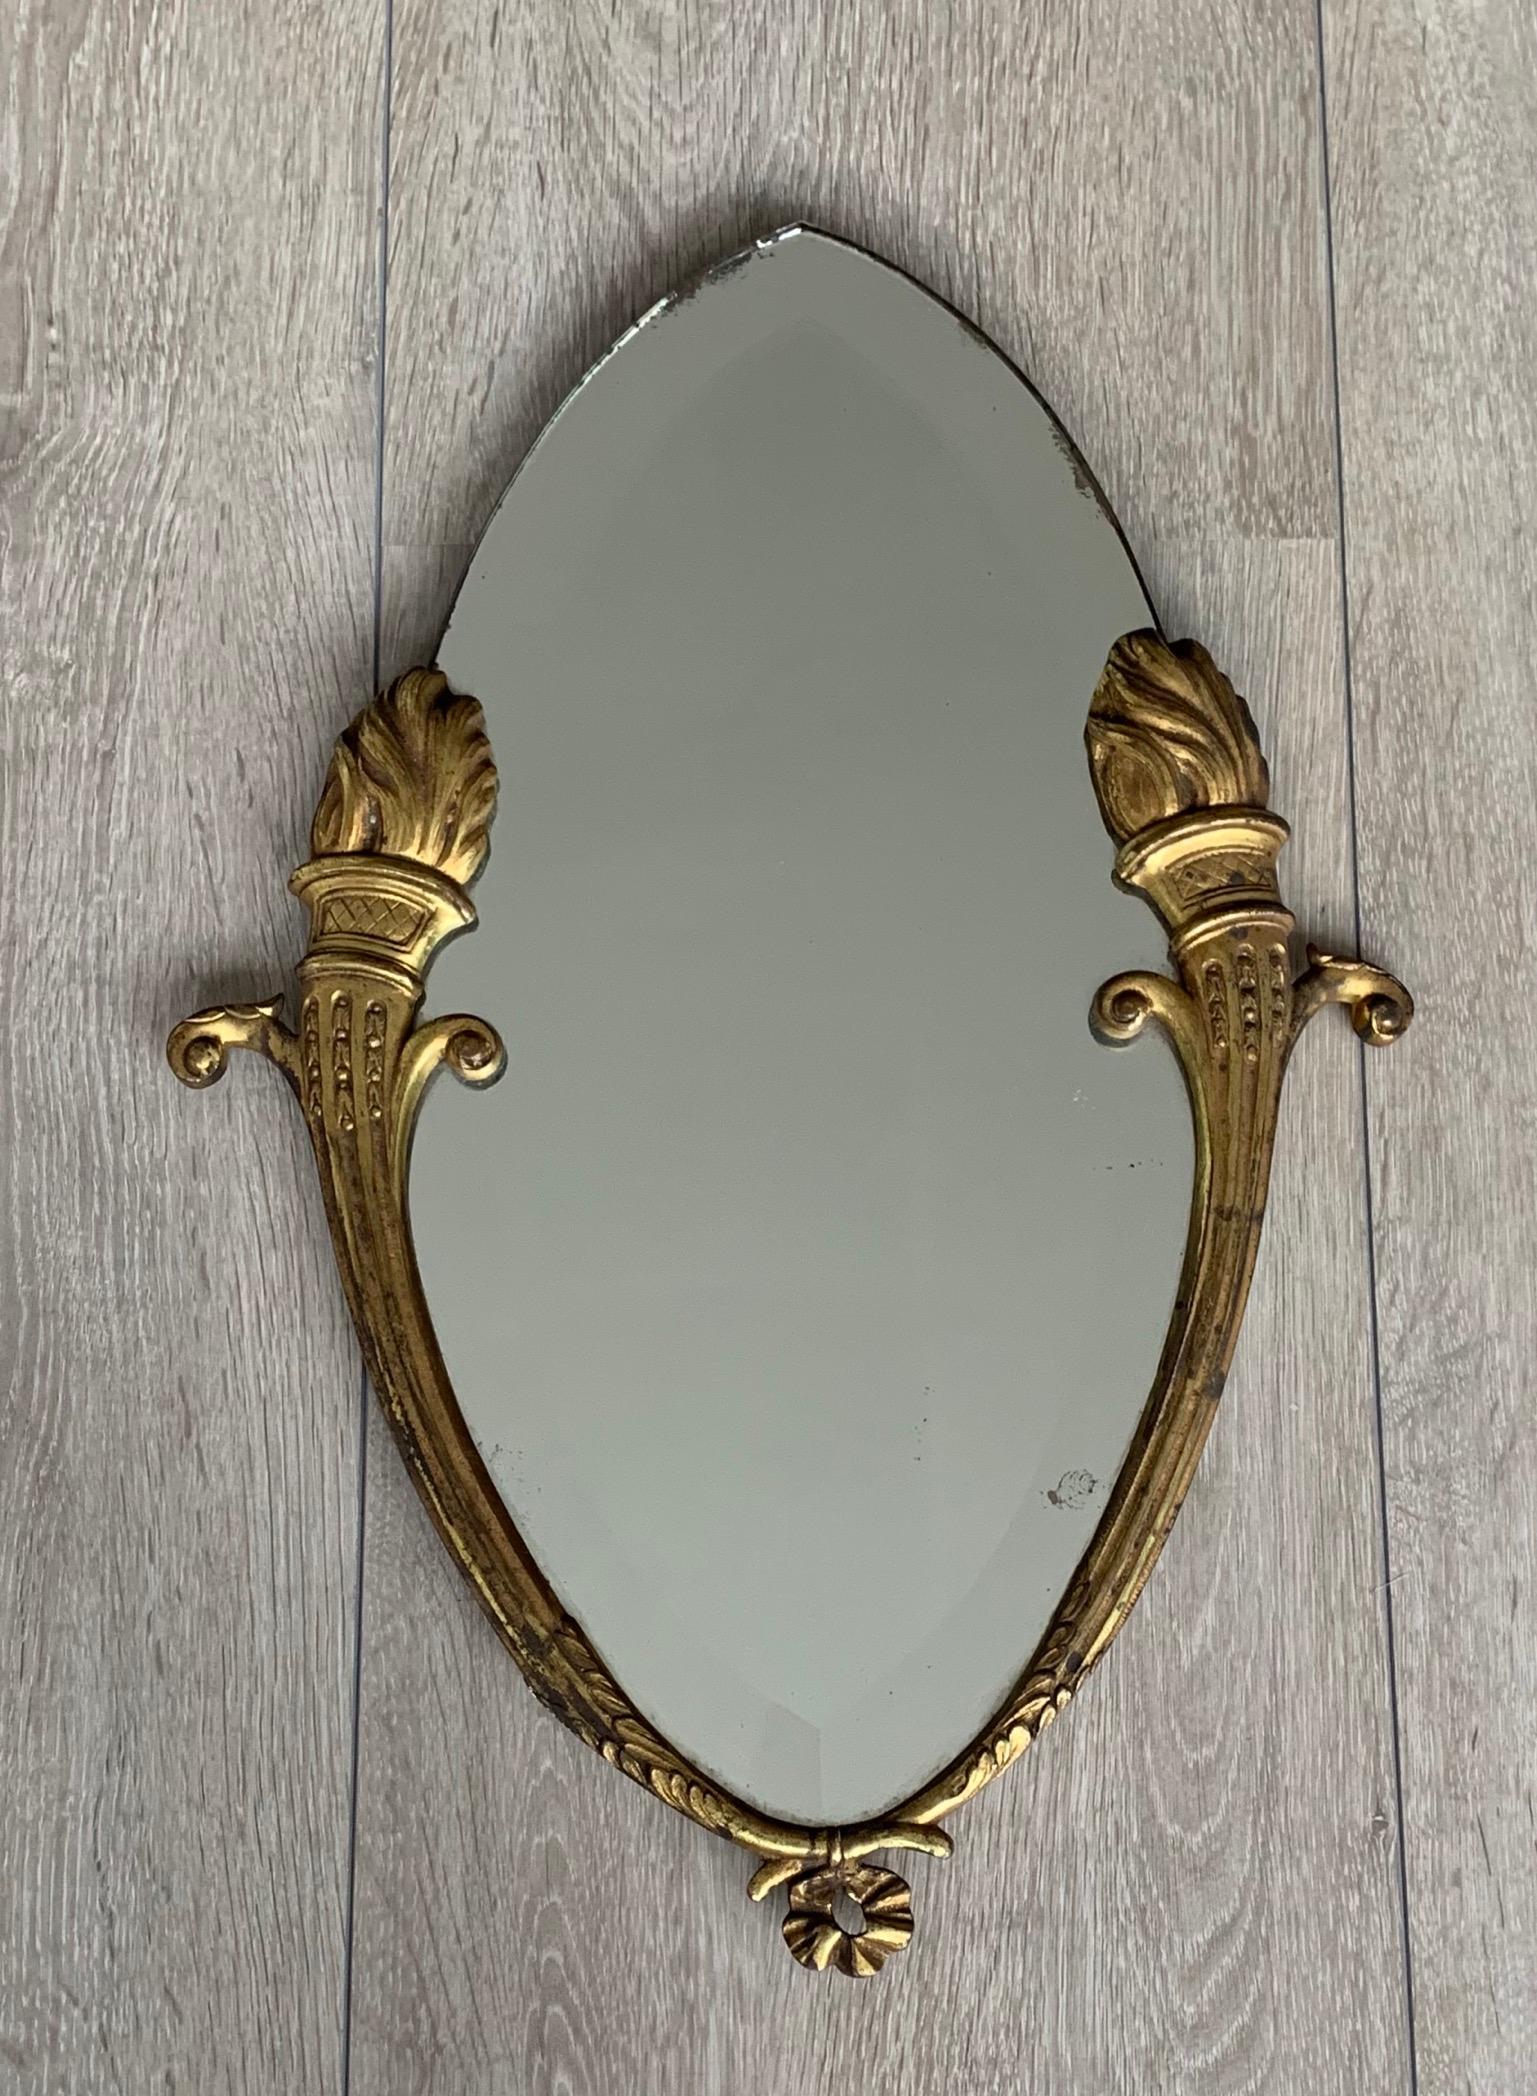 Aesthetically beautiful and romantically meaningful, antique French mirror.

The way in which an individual looks at anything in life can learn you much about them. Most people who are not into antiques won't even notice the details in this